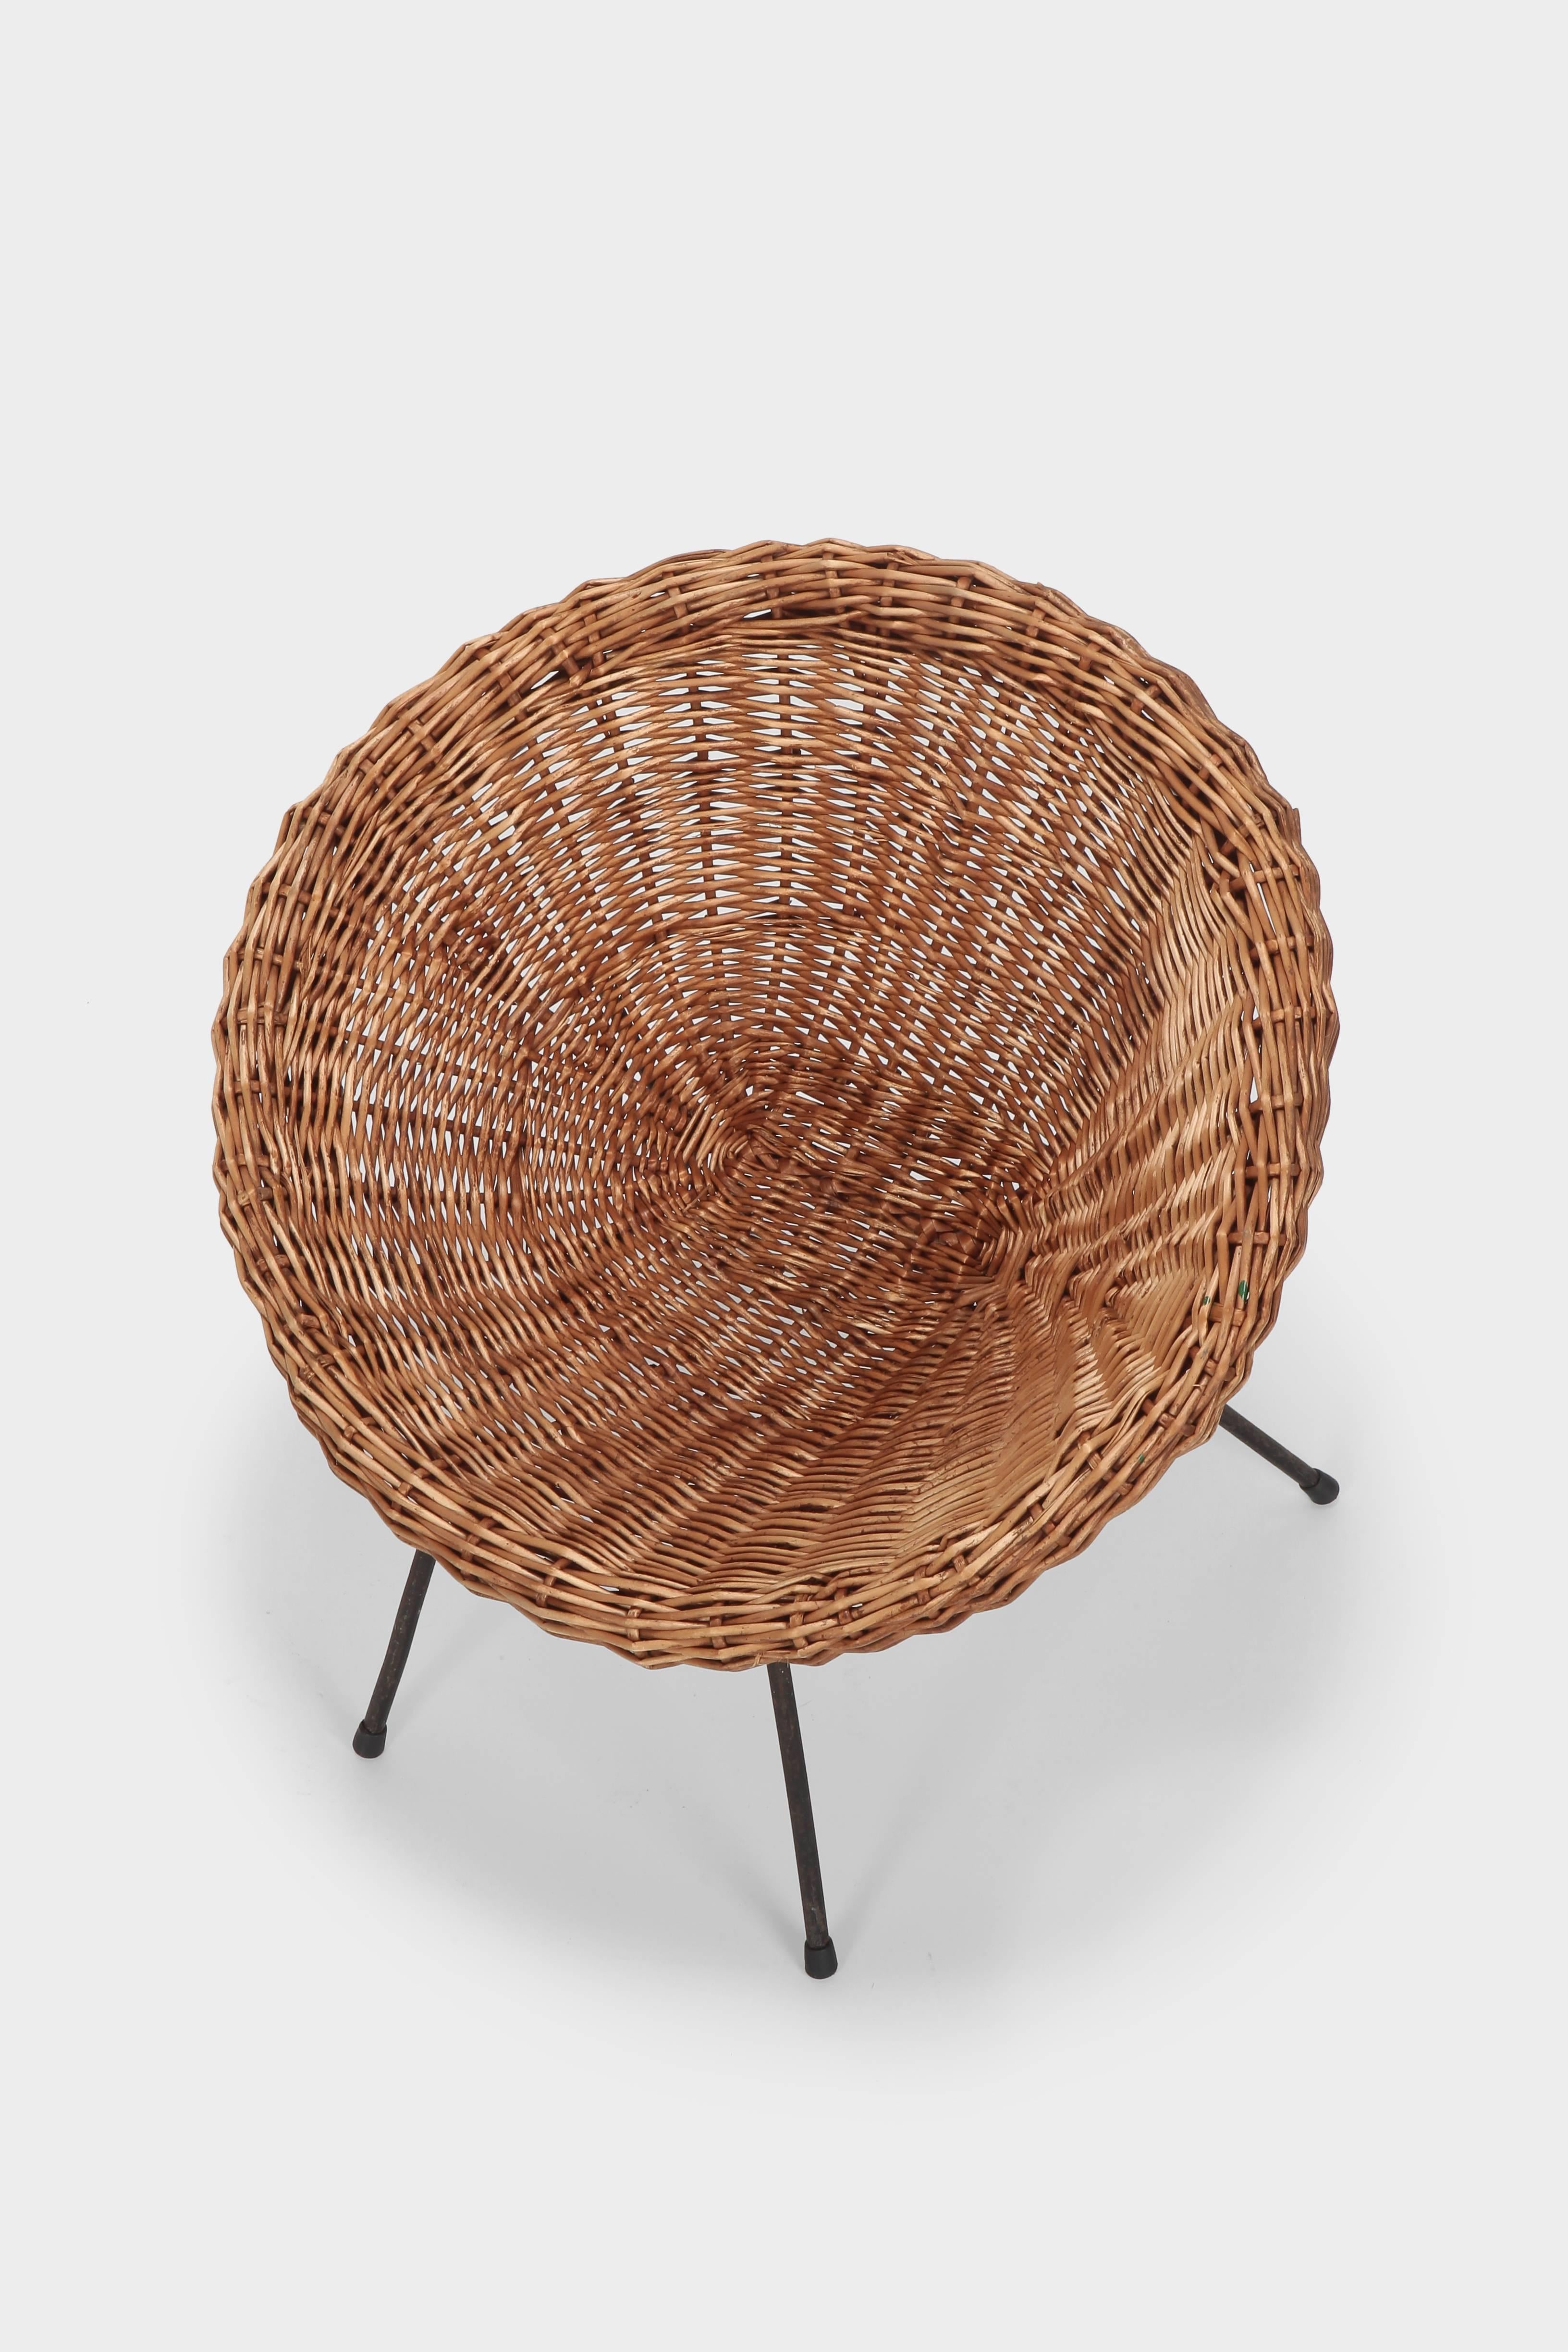 French kid’s wicker chair manufactured in the 1960s. Hopper shaped wicker on a minimalist black lacquered steel frame.